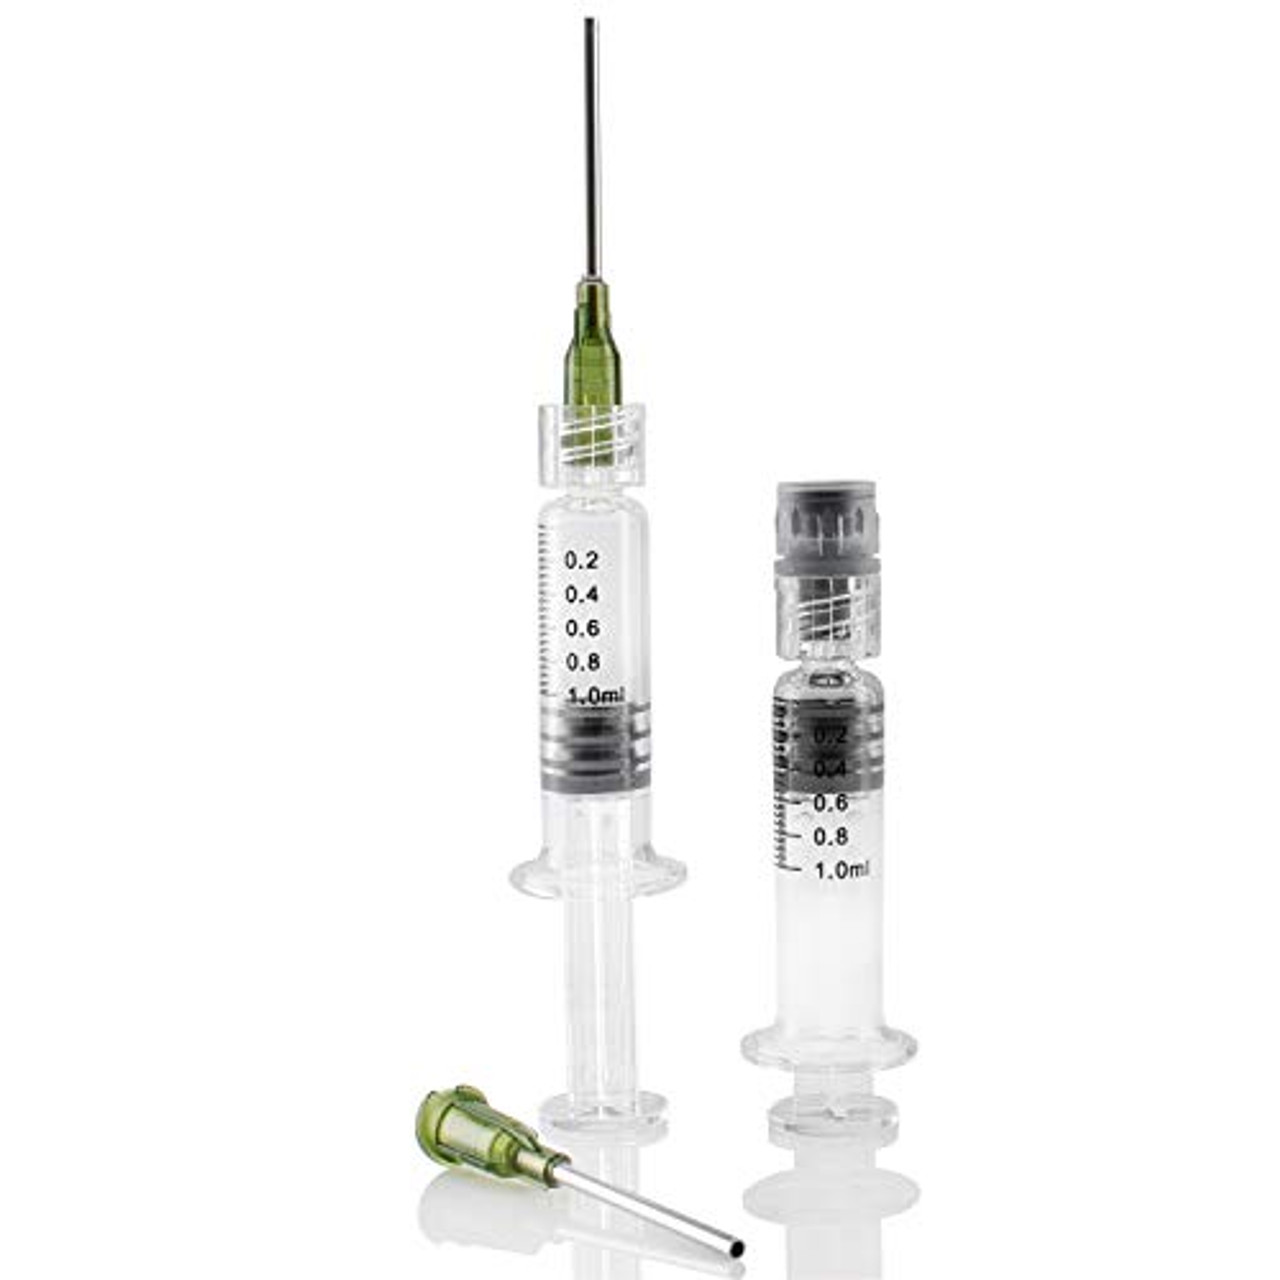 Buy Glass Syringe, Metal Luer Lock, 10 mL for Laboratory and